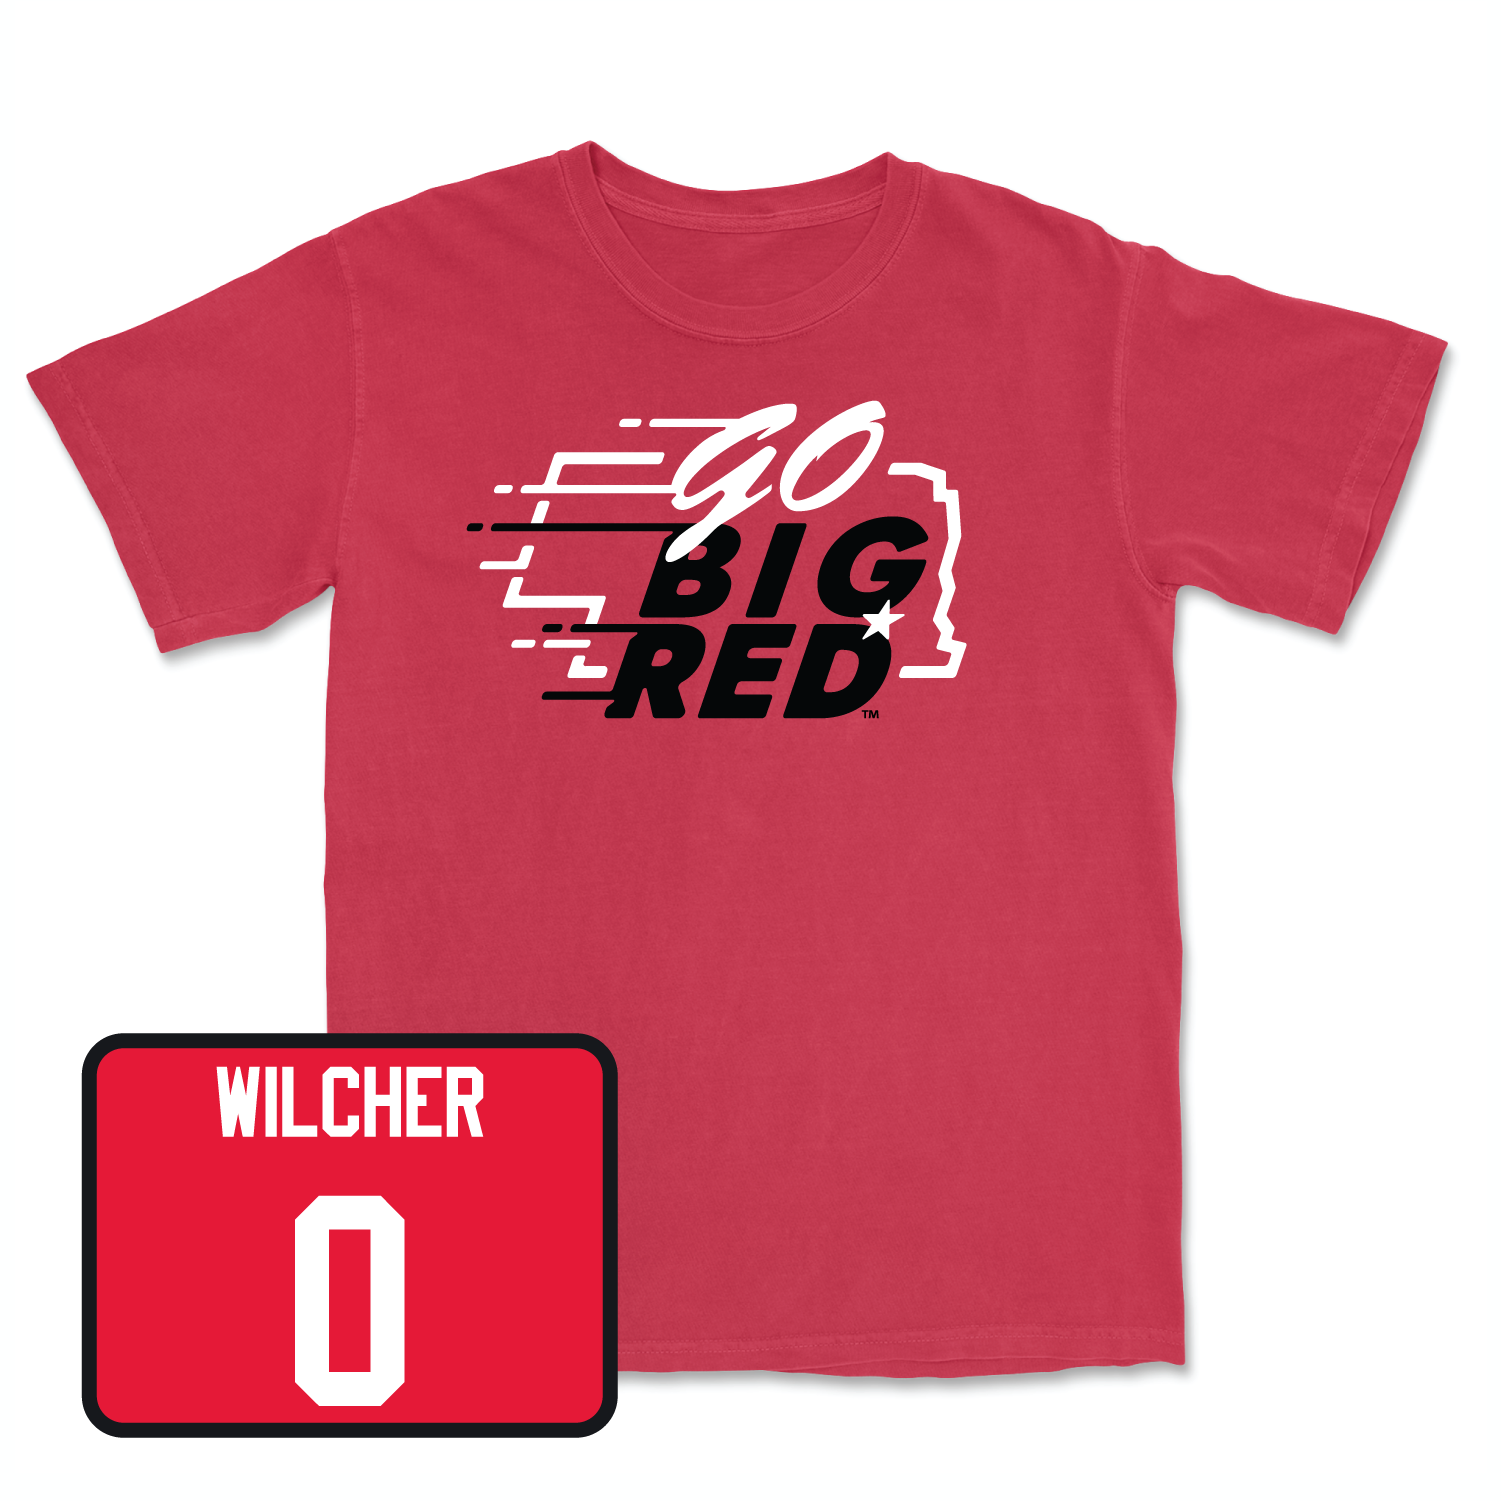 Red Men's Basketball GBR Tee X-Large / C.J. Wilcher | #0